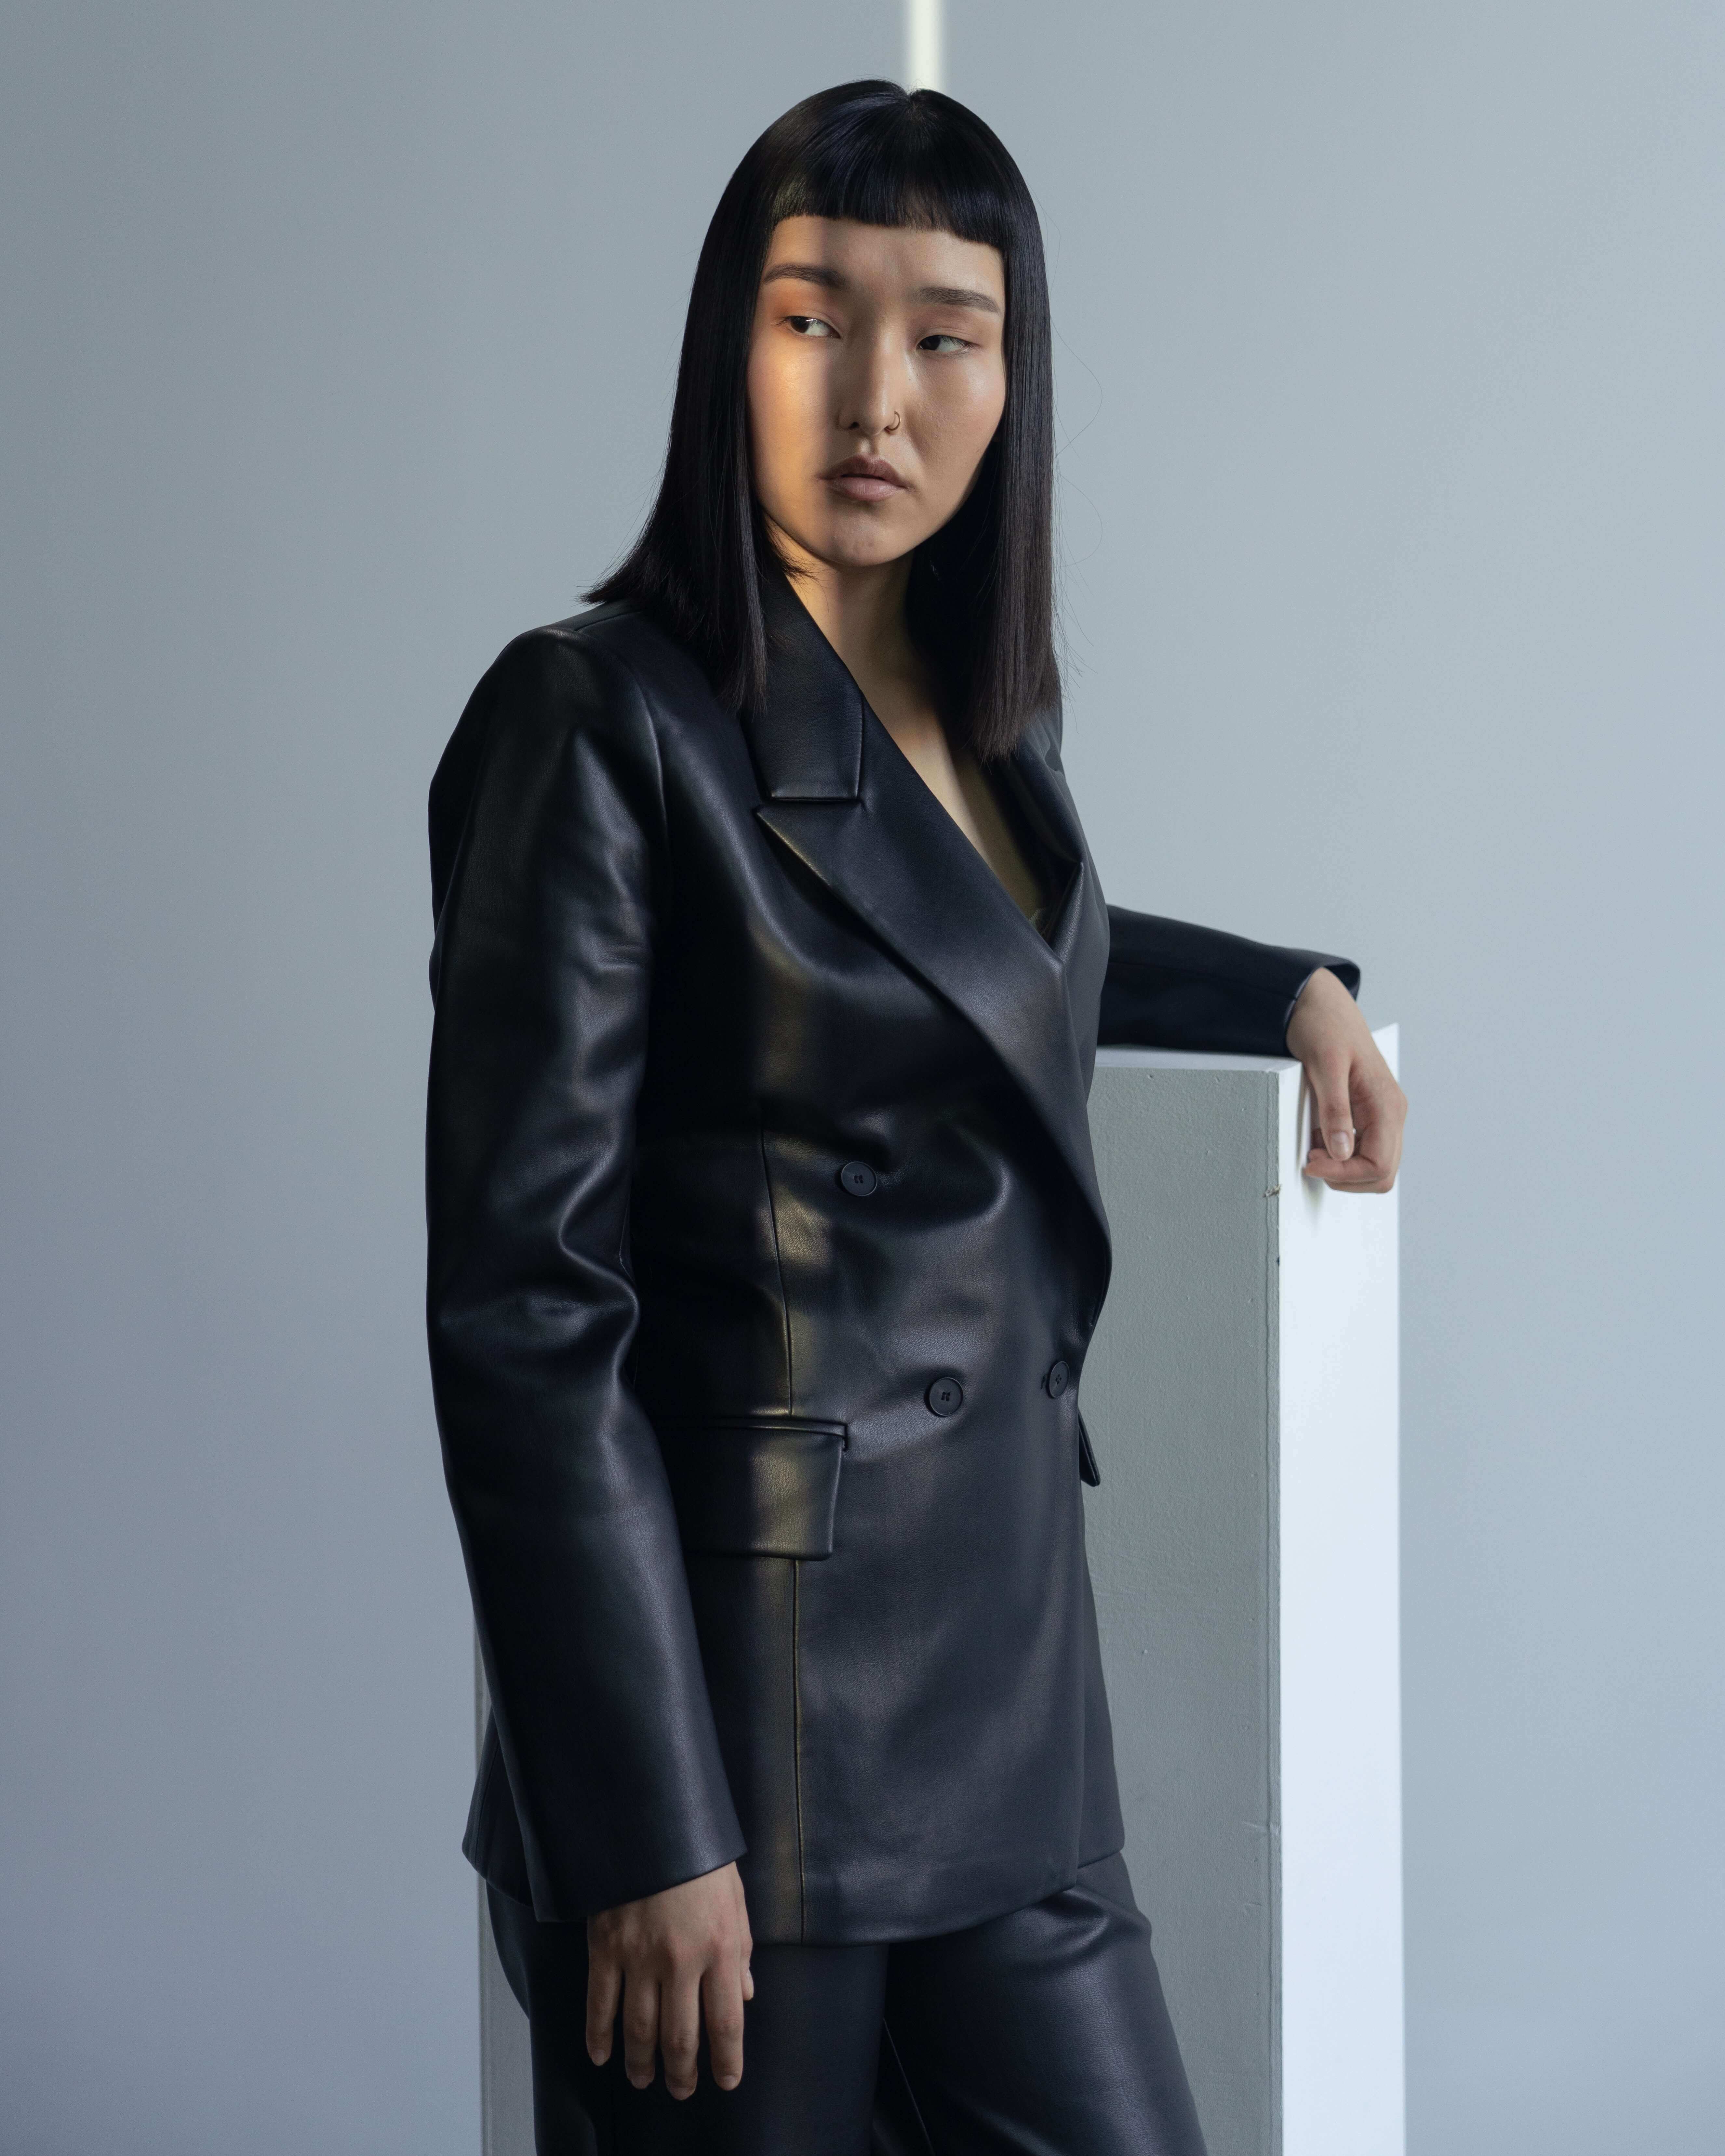 Woman model with dark, straight, shoulder-length hair, in black leather blazer and pants, resting arm on a white pedestal, looking over her shoulder.